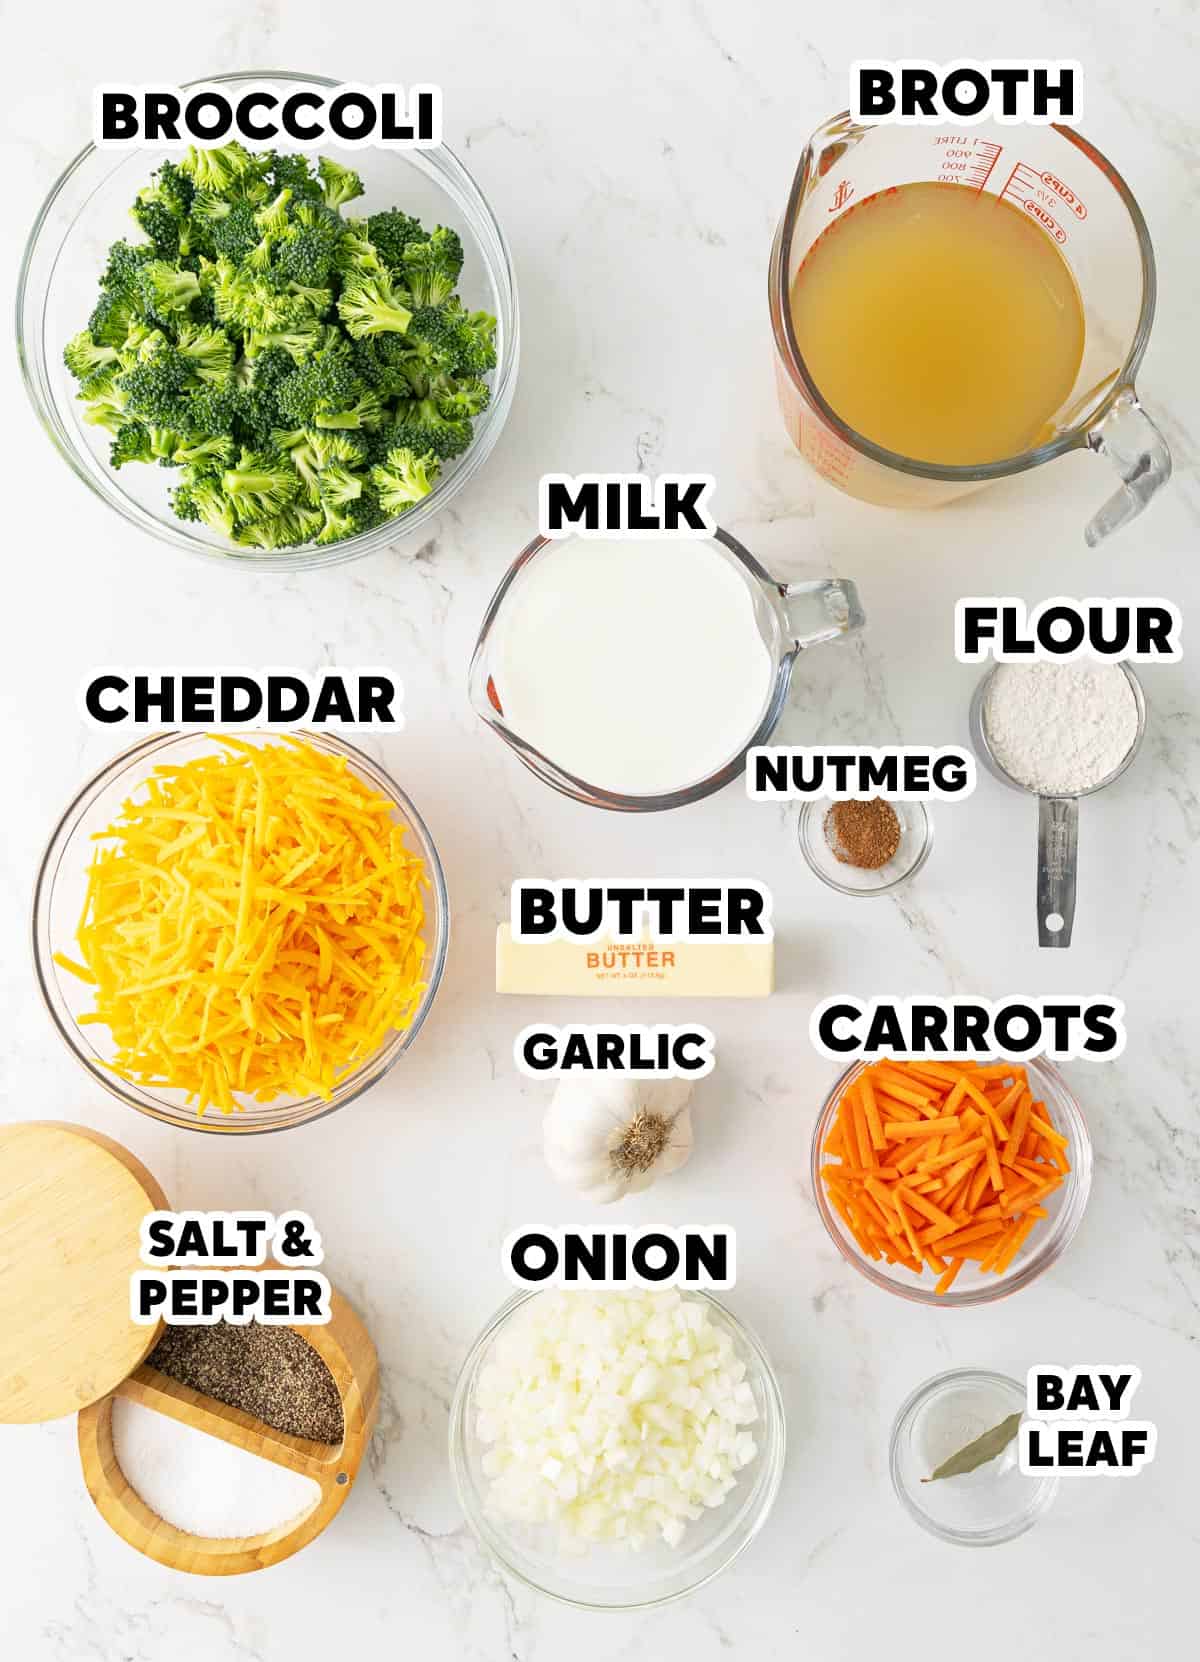 Ingredients for making broccoli cheddar soup with overlay text.